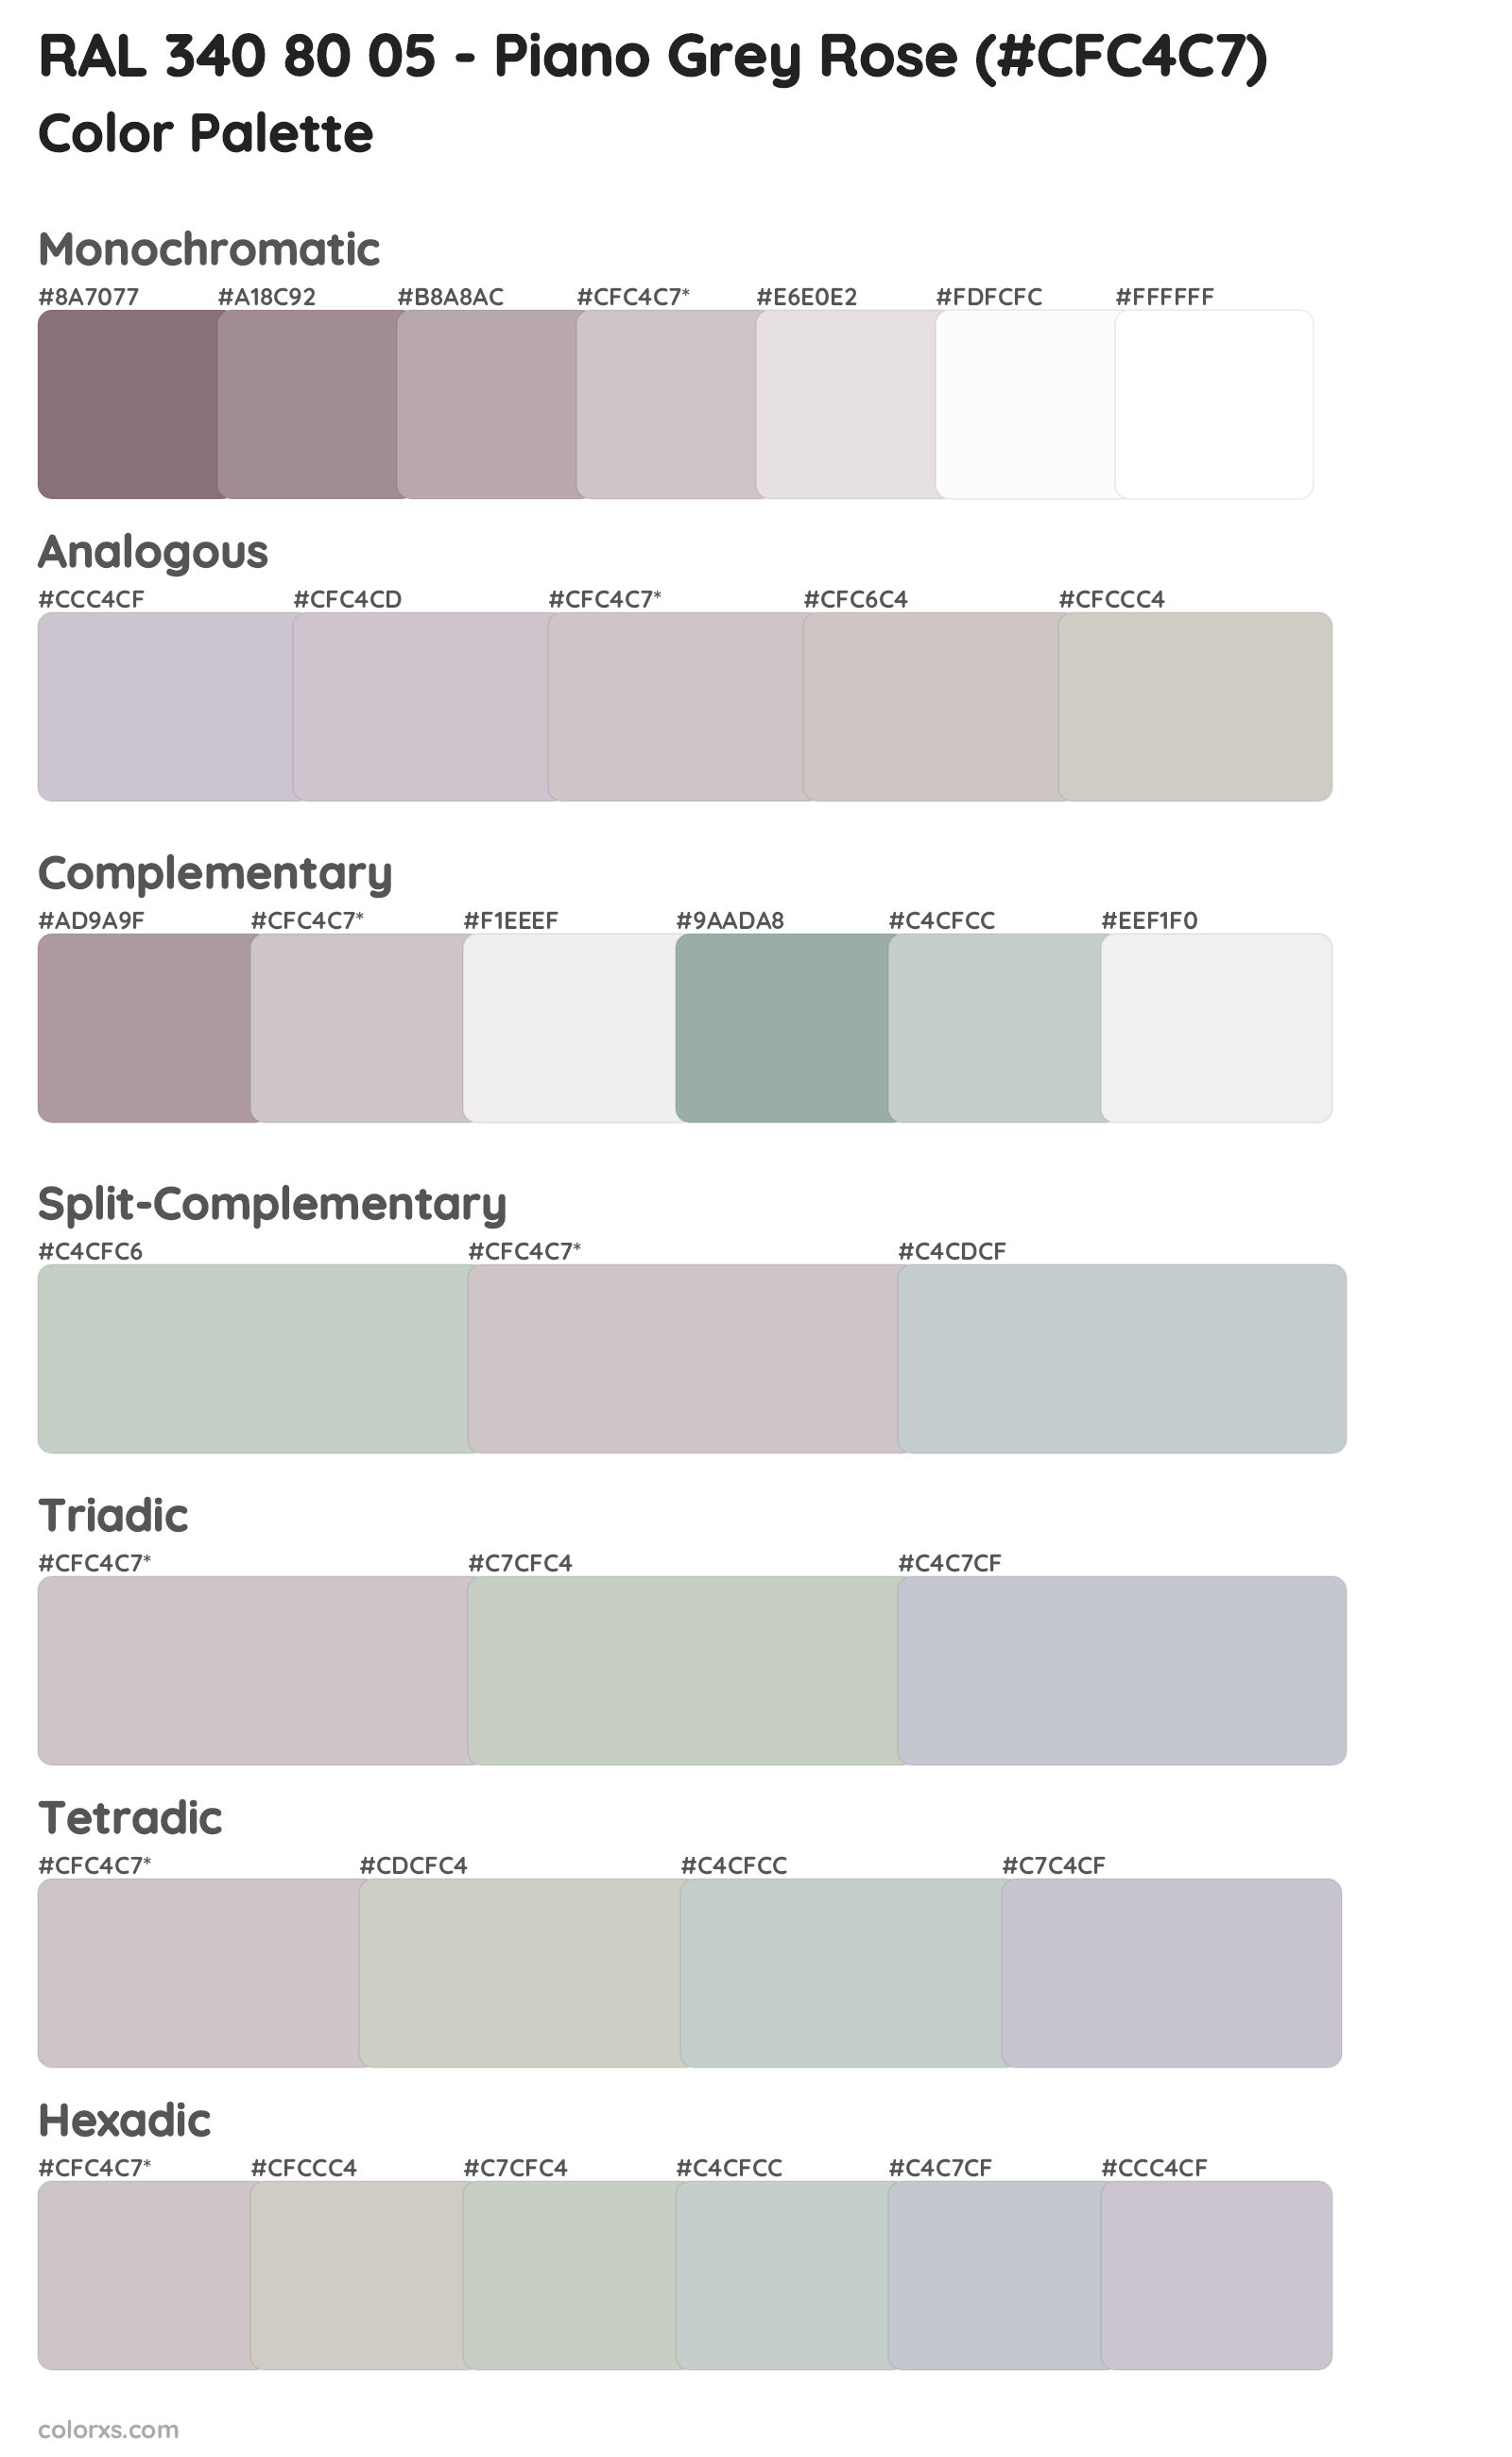 RAL 340 80 05 - Piano Grey Rose Color Scheme Palettes